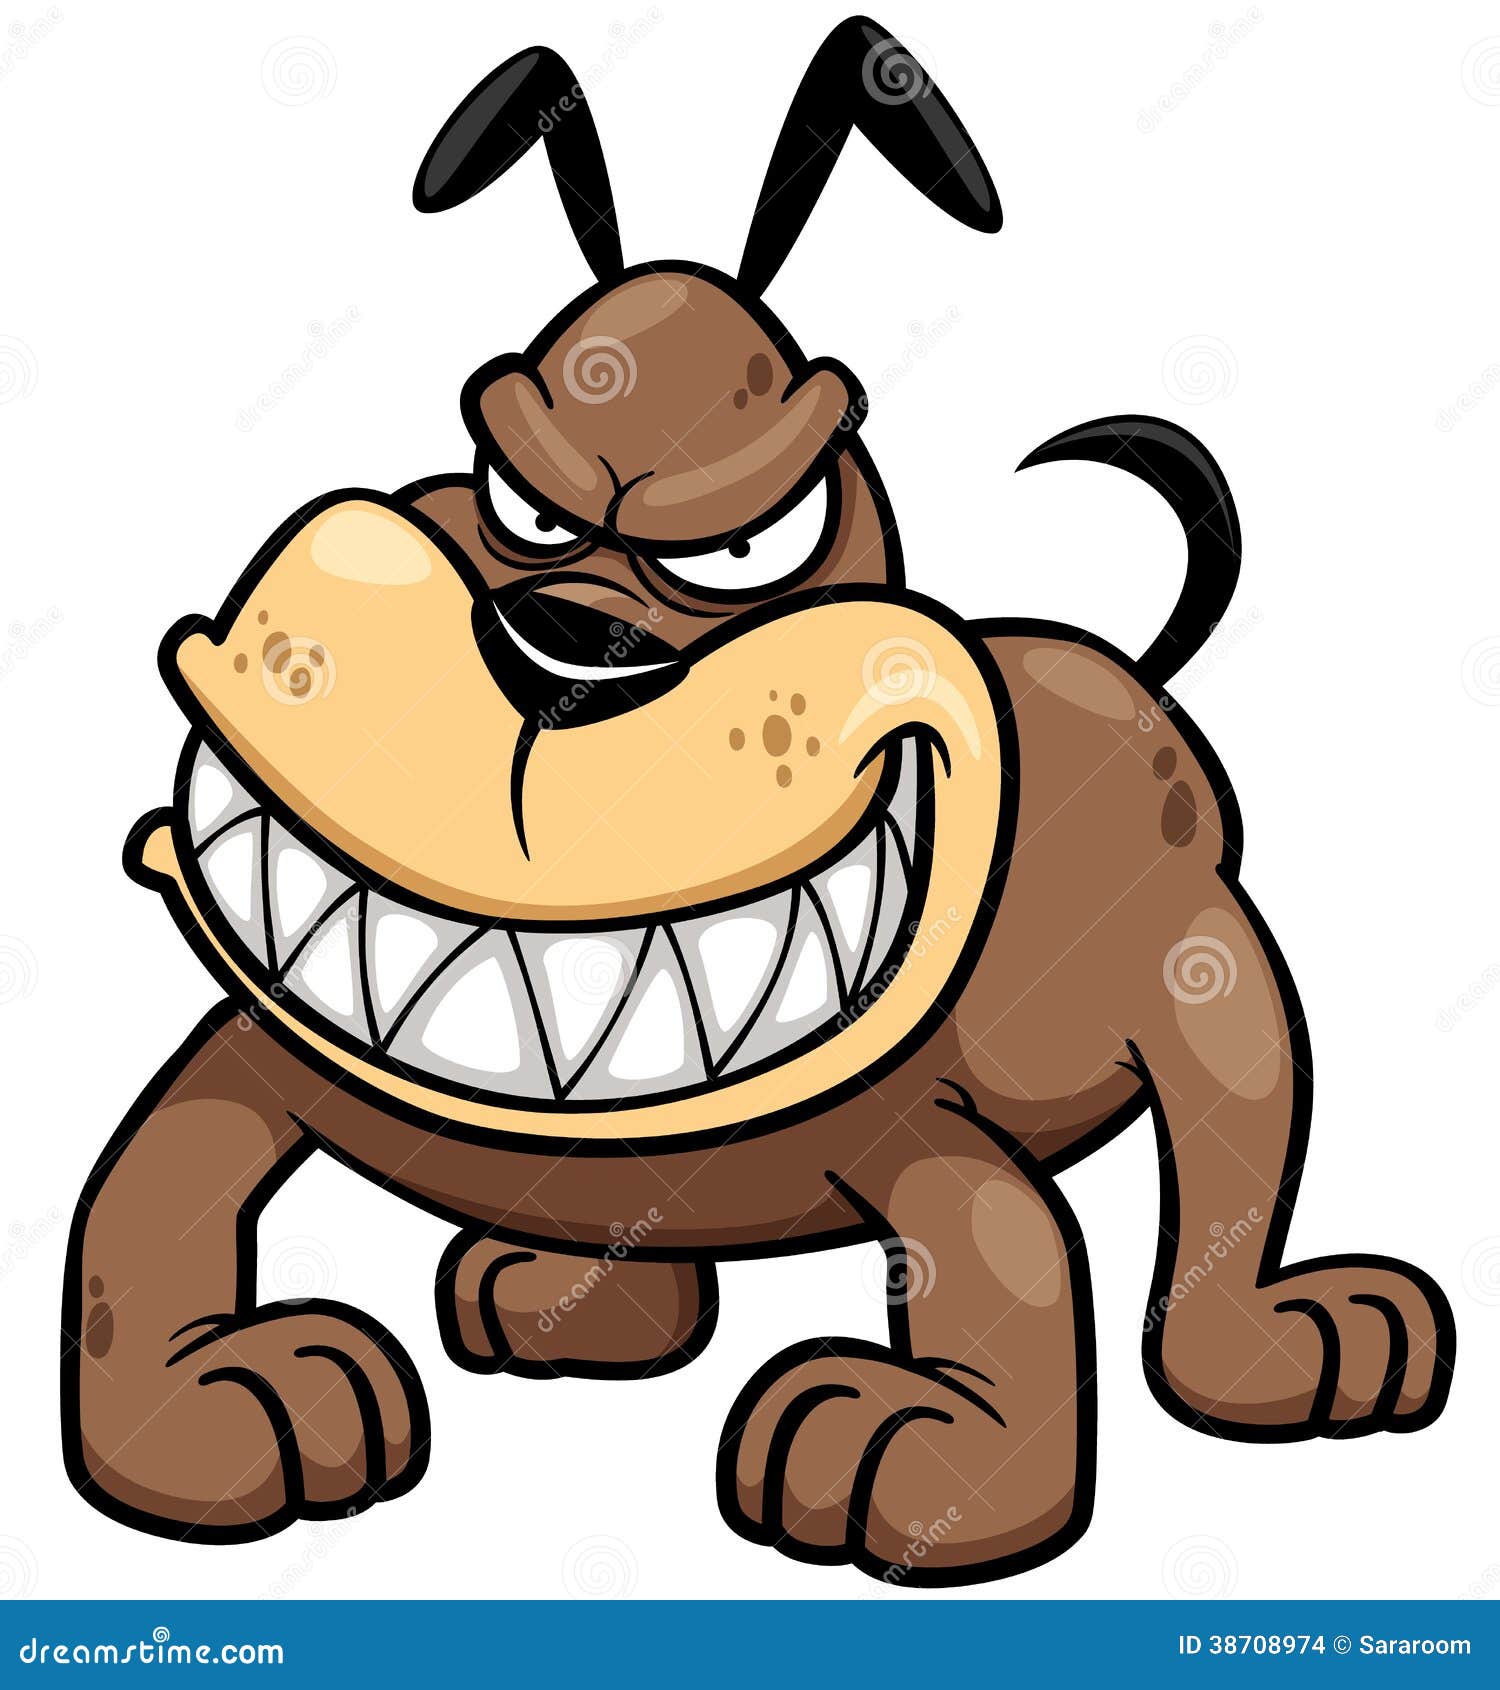 angry dog clipart - photo #39